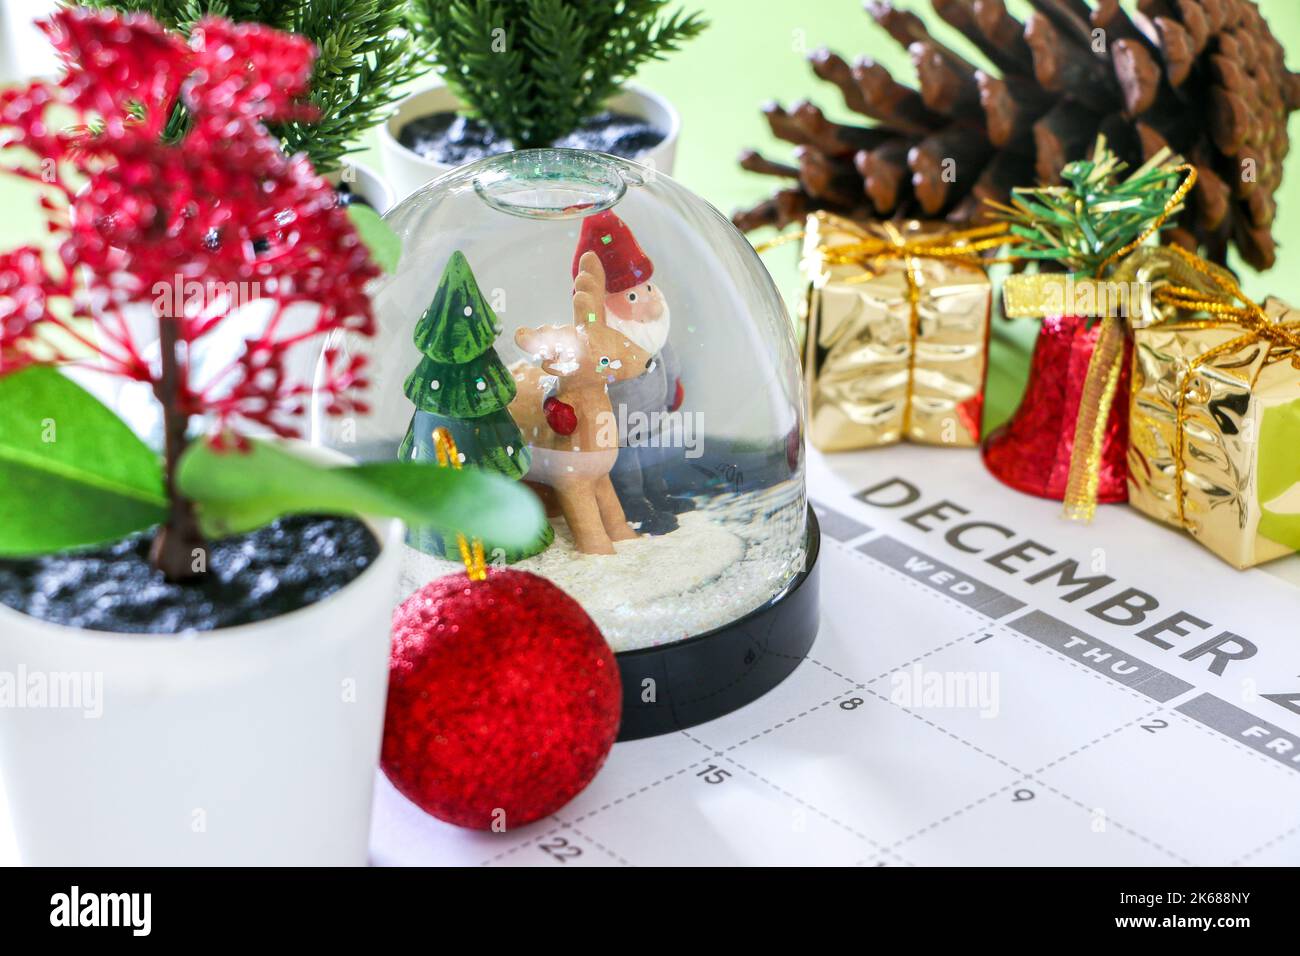 Colourful Christmas concept, festive snow globe and other decorations on December calendar, pine trees, pine cone, gifts, bell and bauble, merry Chris Stock Photo